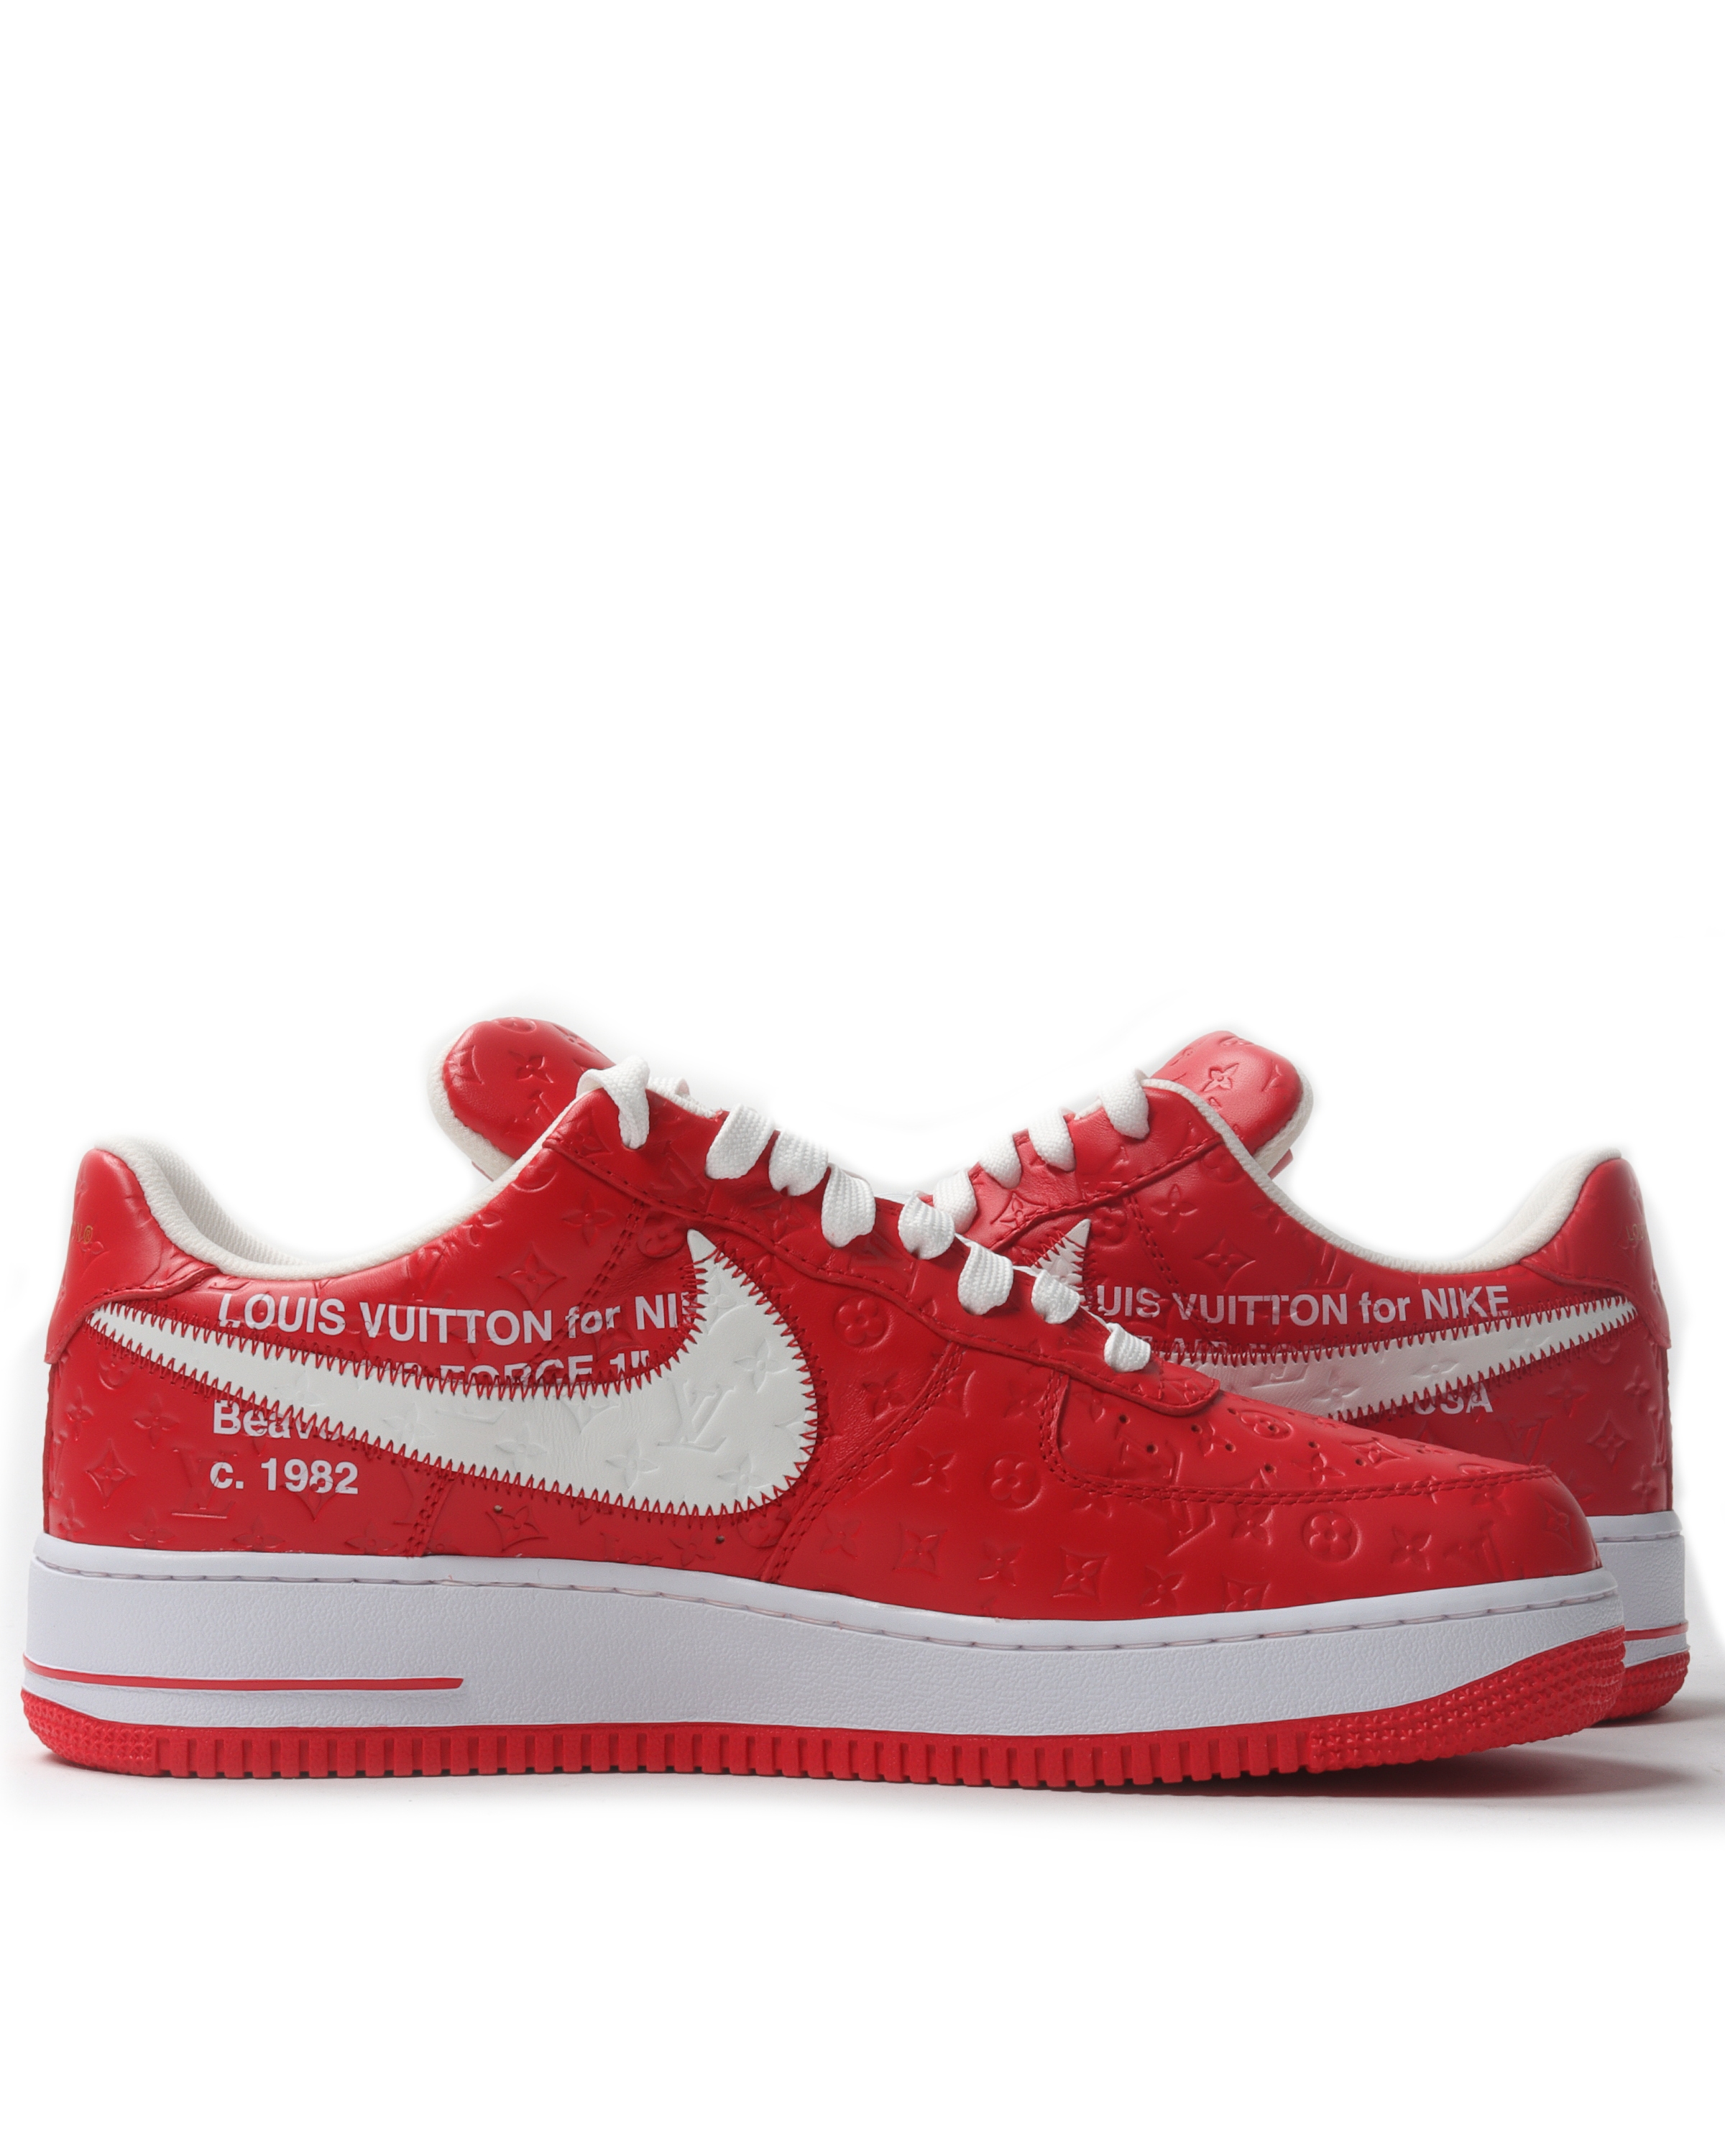 louis vuitton air forces red